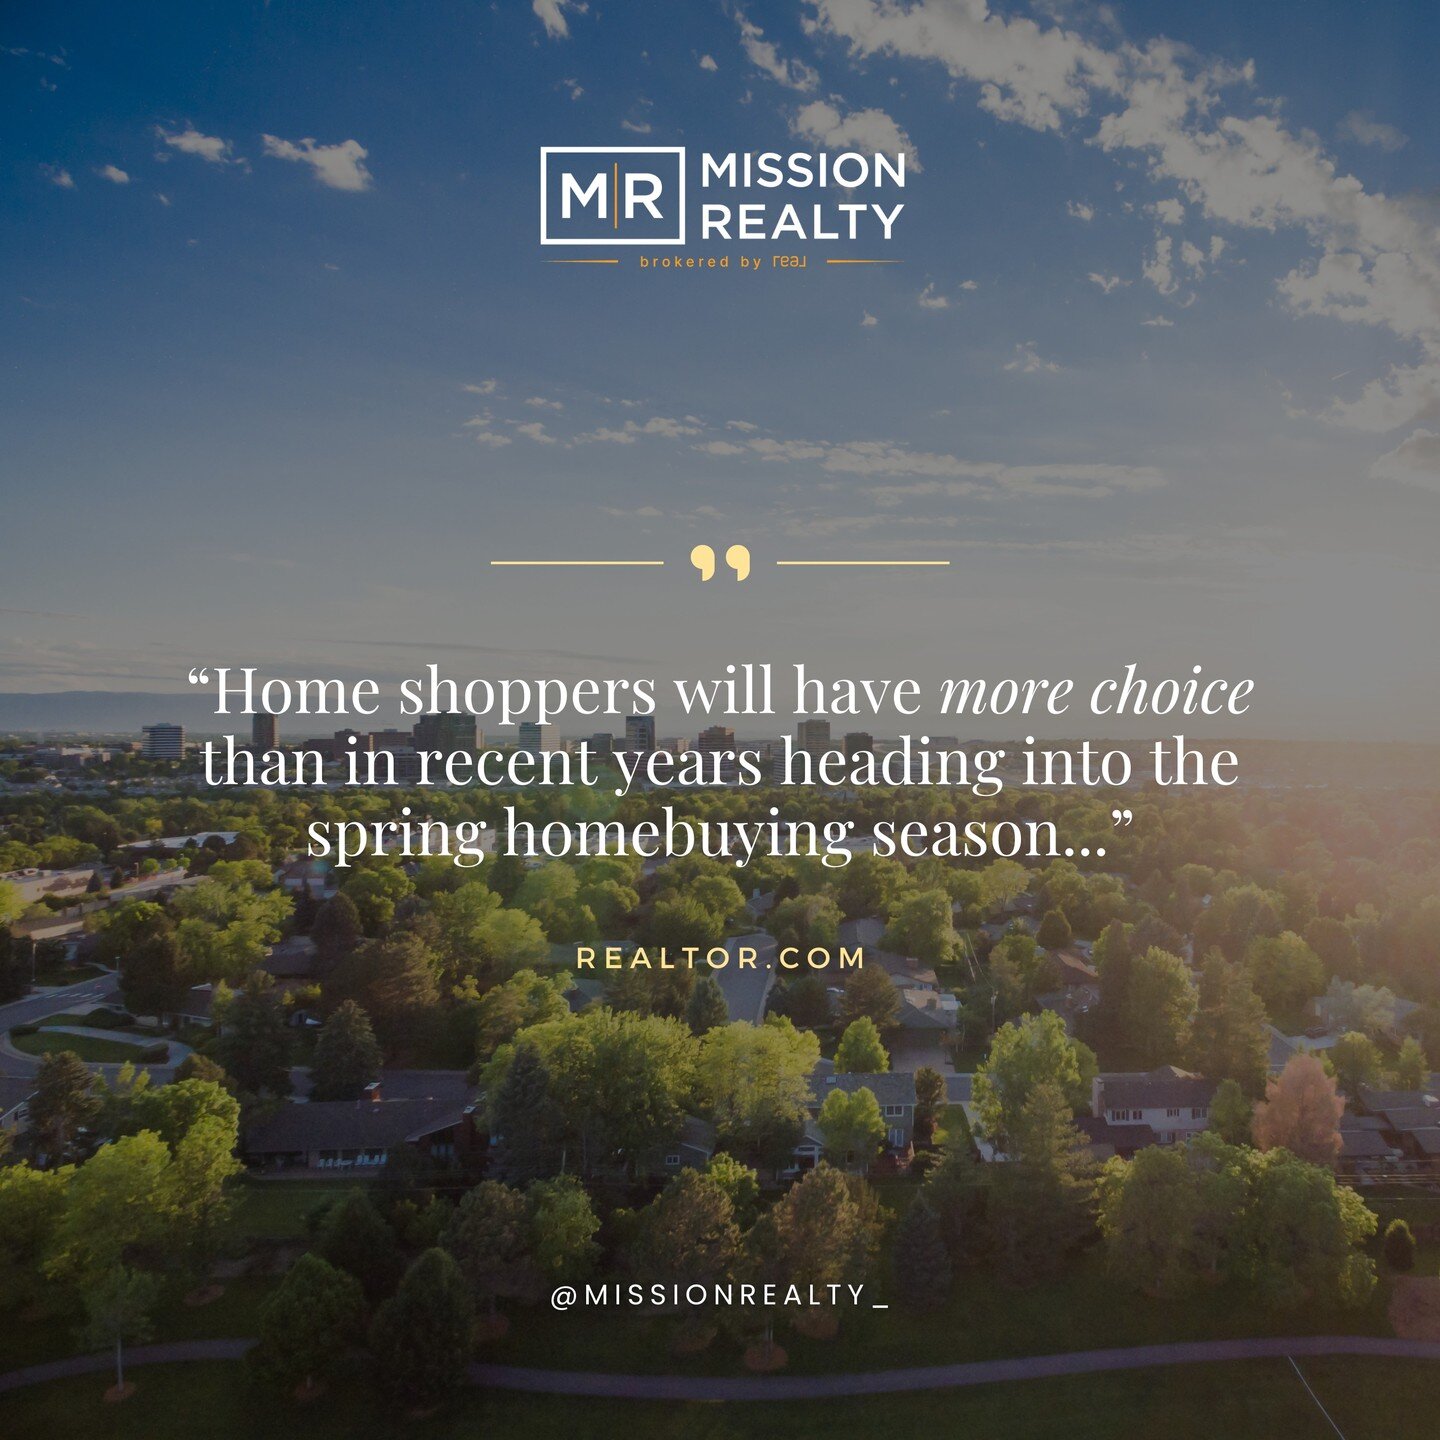 Are you thinking about whether to buy a home or not? Well, spring is the peak homebuying season, and experts say there will be more available homes than last year. That means you'll have more choices for your search. DM us and let&rsquo;s get out and